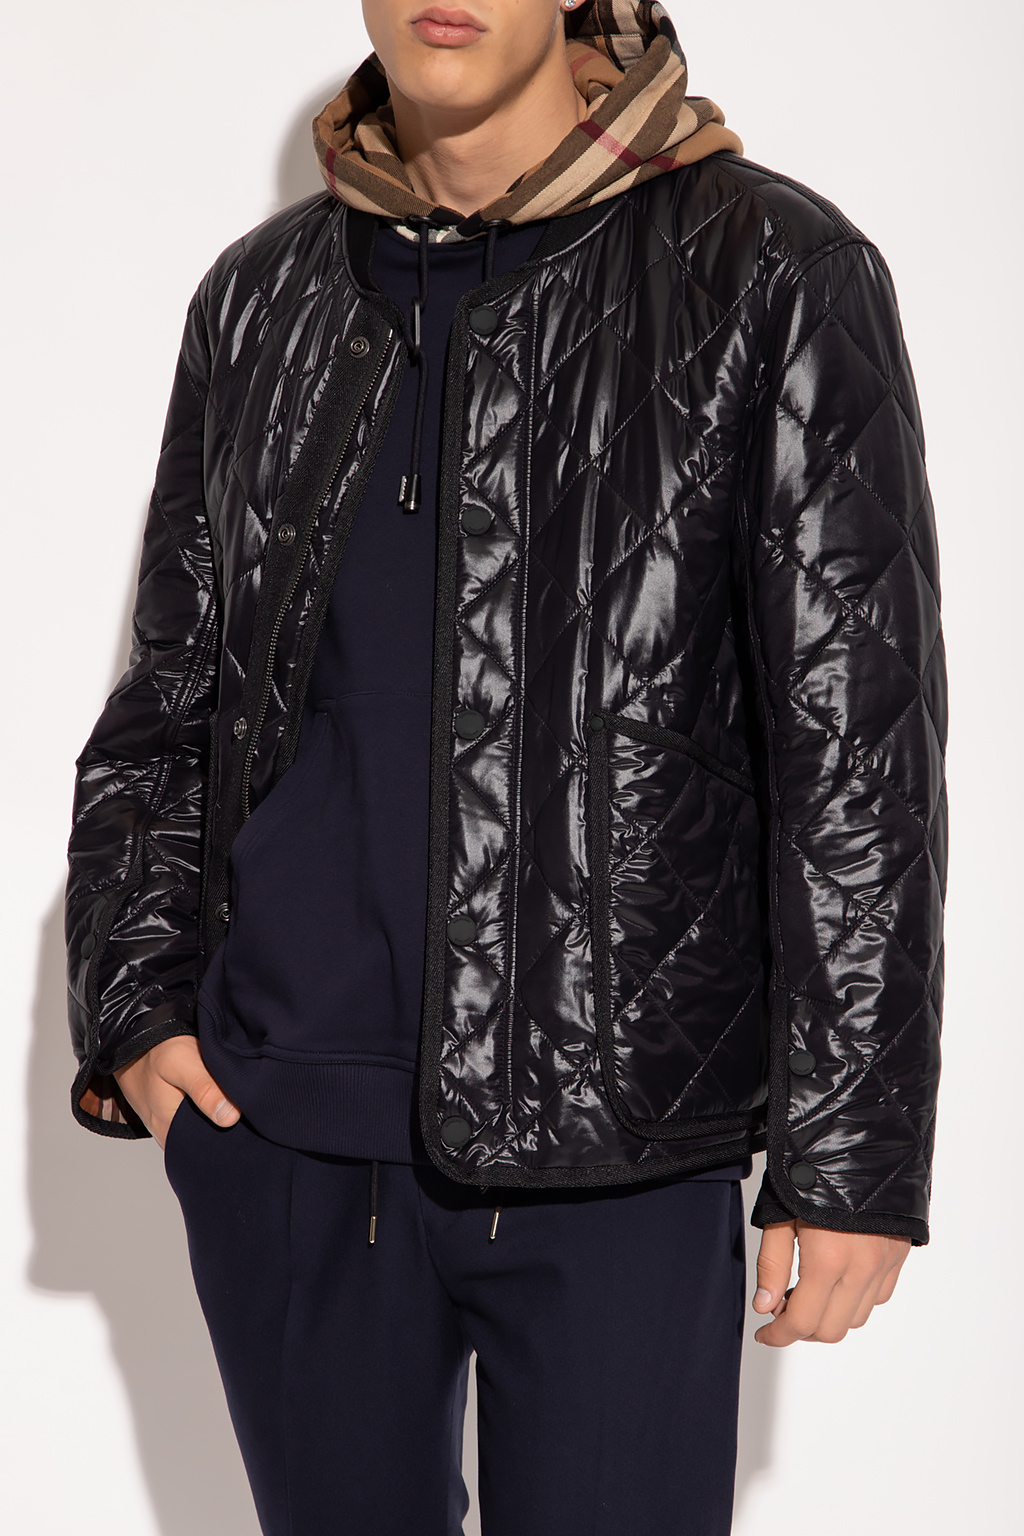 burberry side ‘York’ quilted jacket